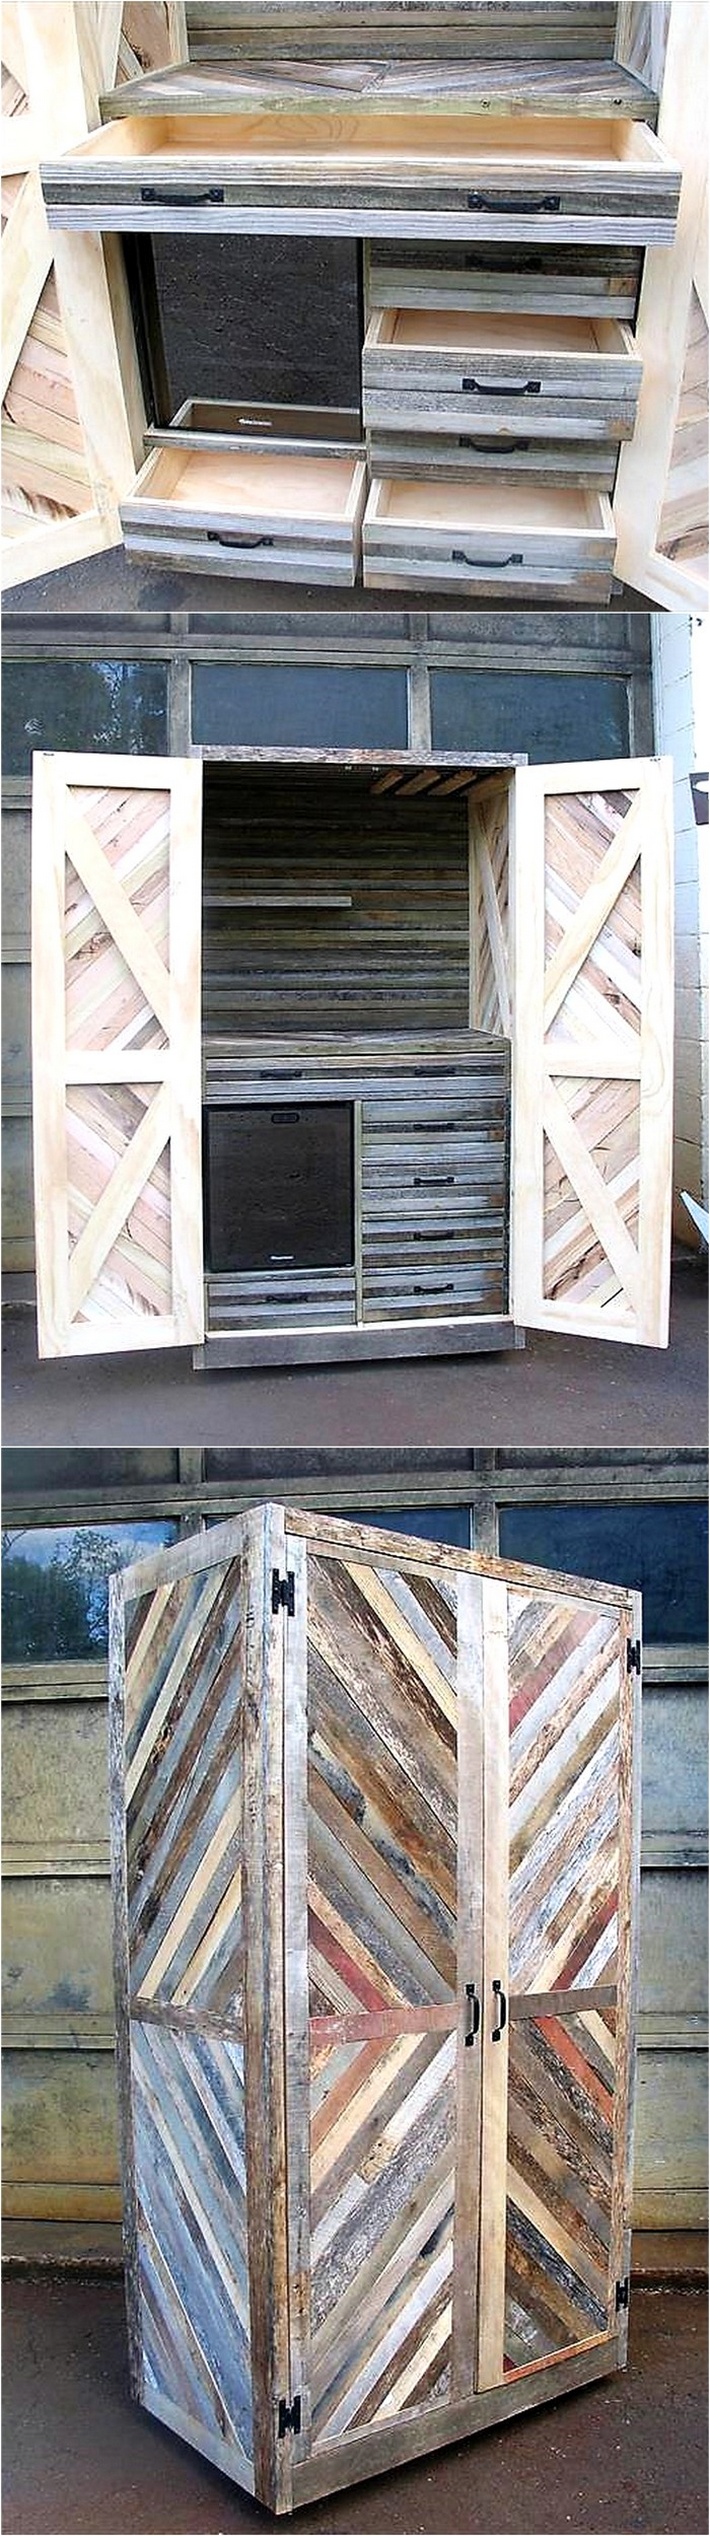 upcycled-pallets-closet